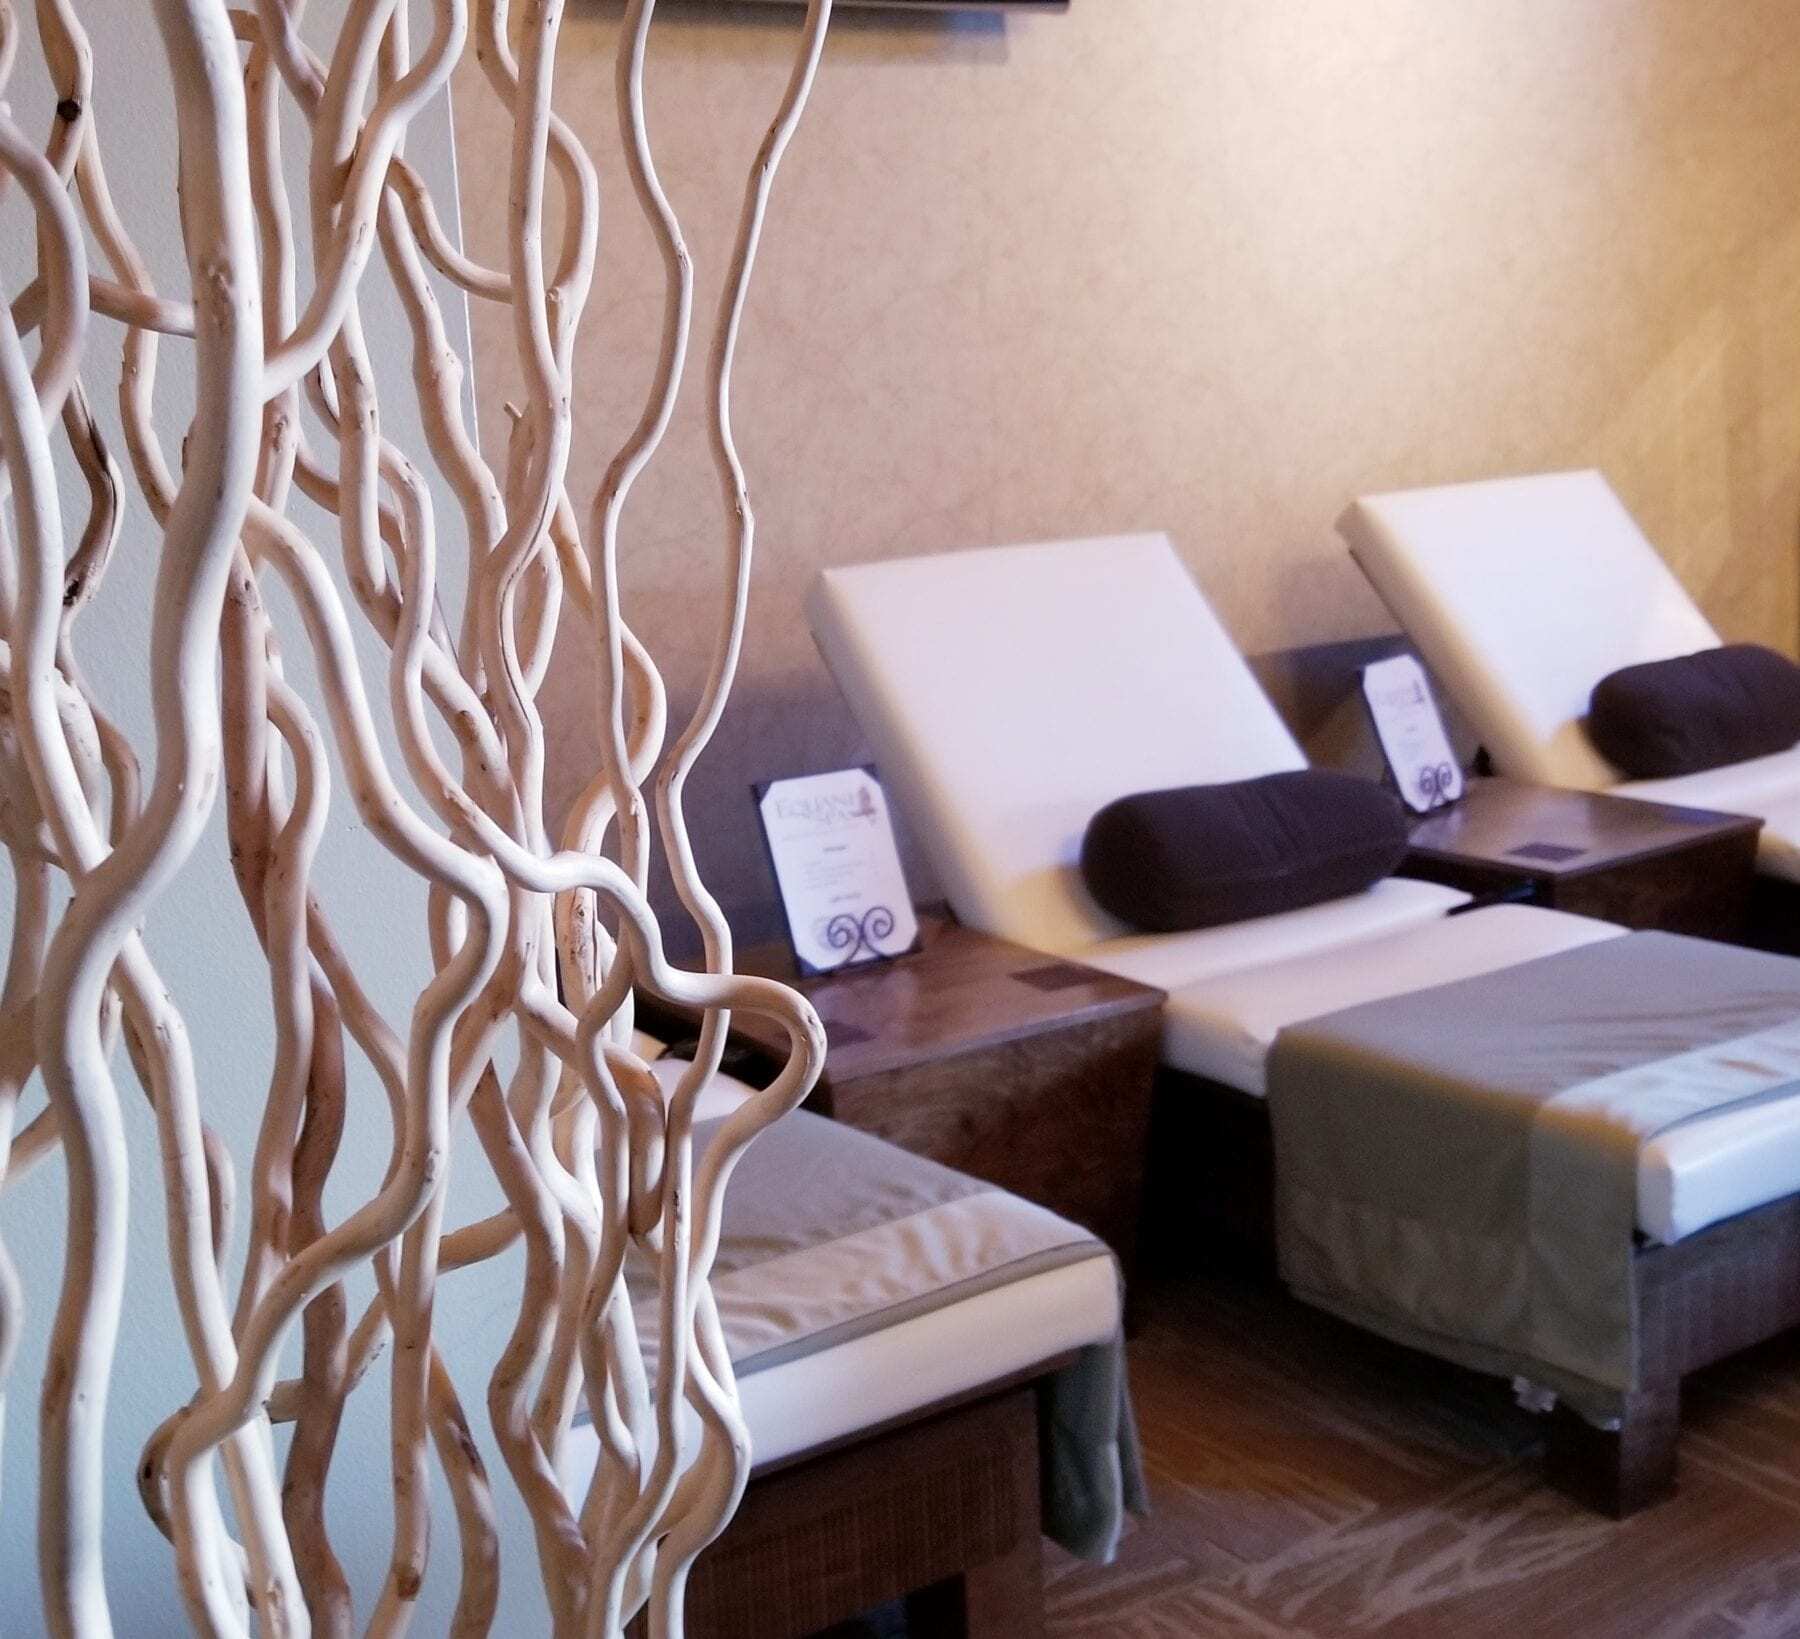 "The relaxation room at Equani Spa in Young Harris, Georgia, exudes tranquility and calmness with its soft lighting, comfortable seating, and serene decor, inviting guests to unwind and rejuvenate in a peaceful atmosphere."